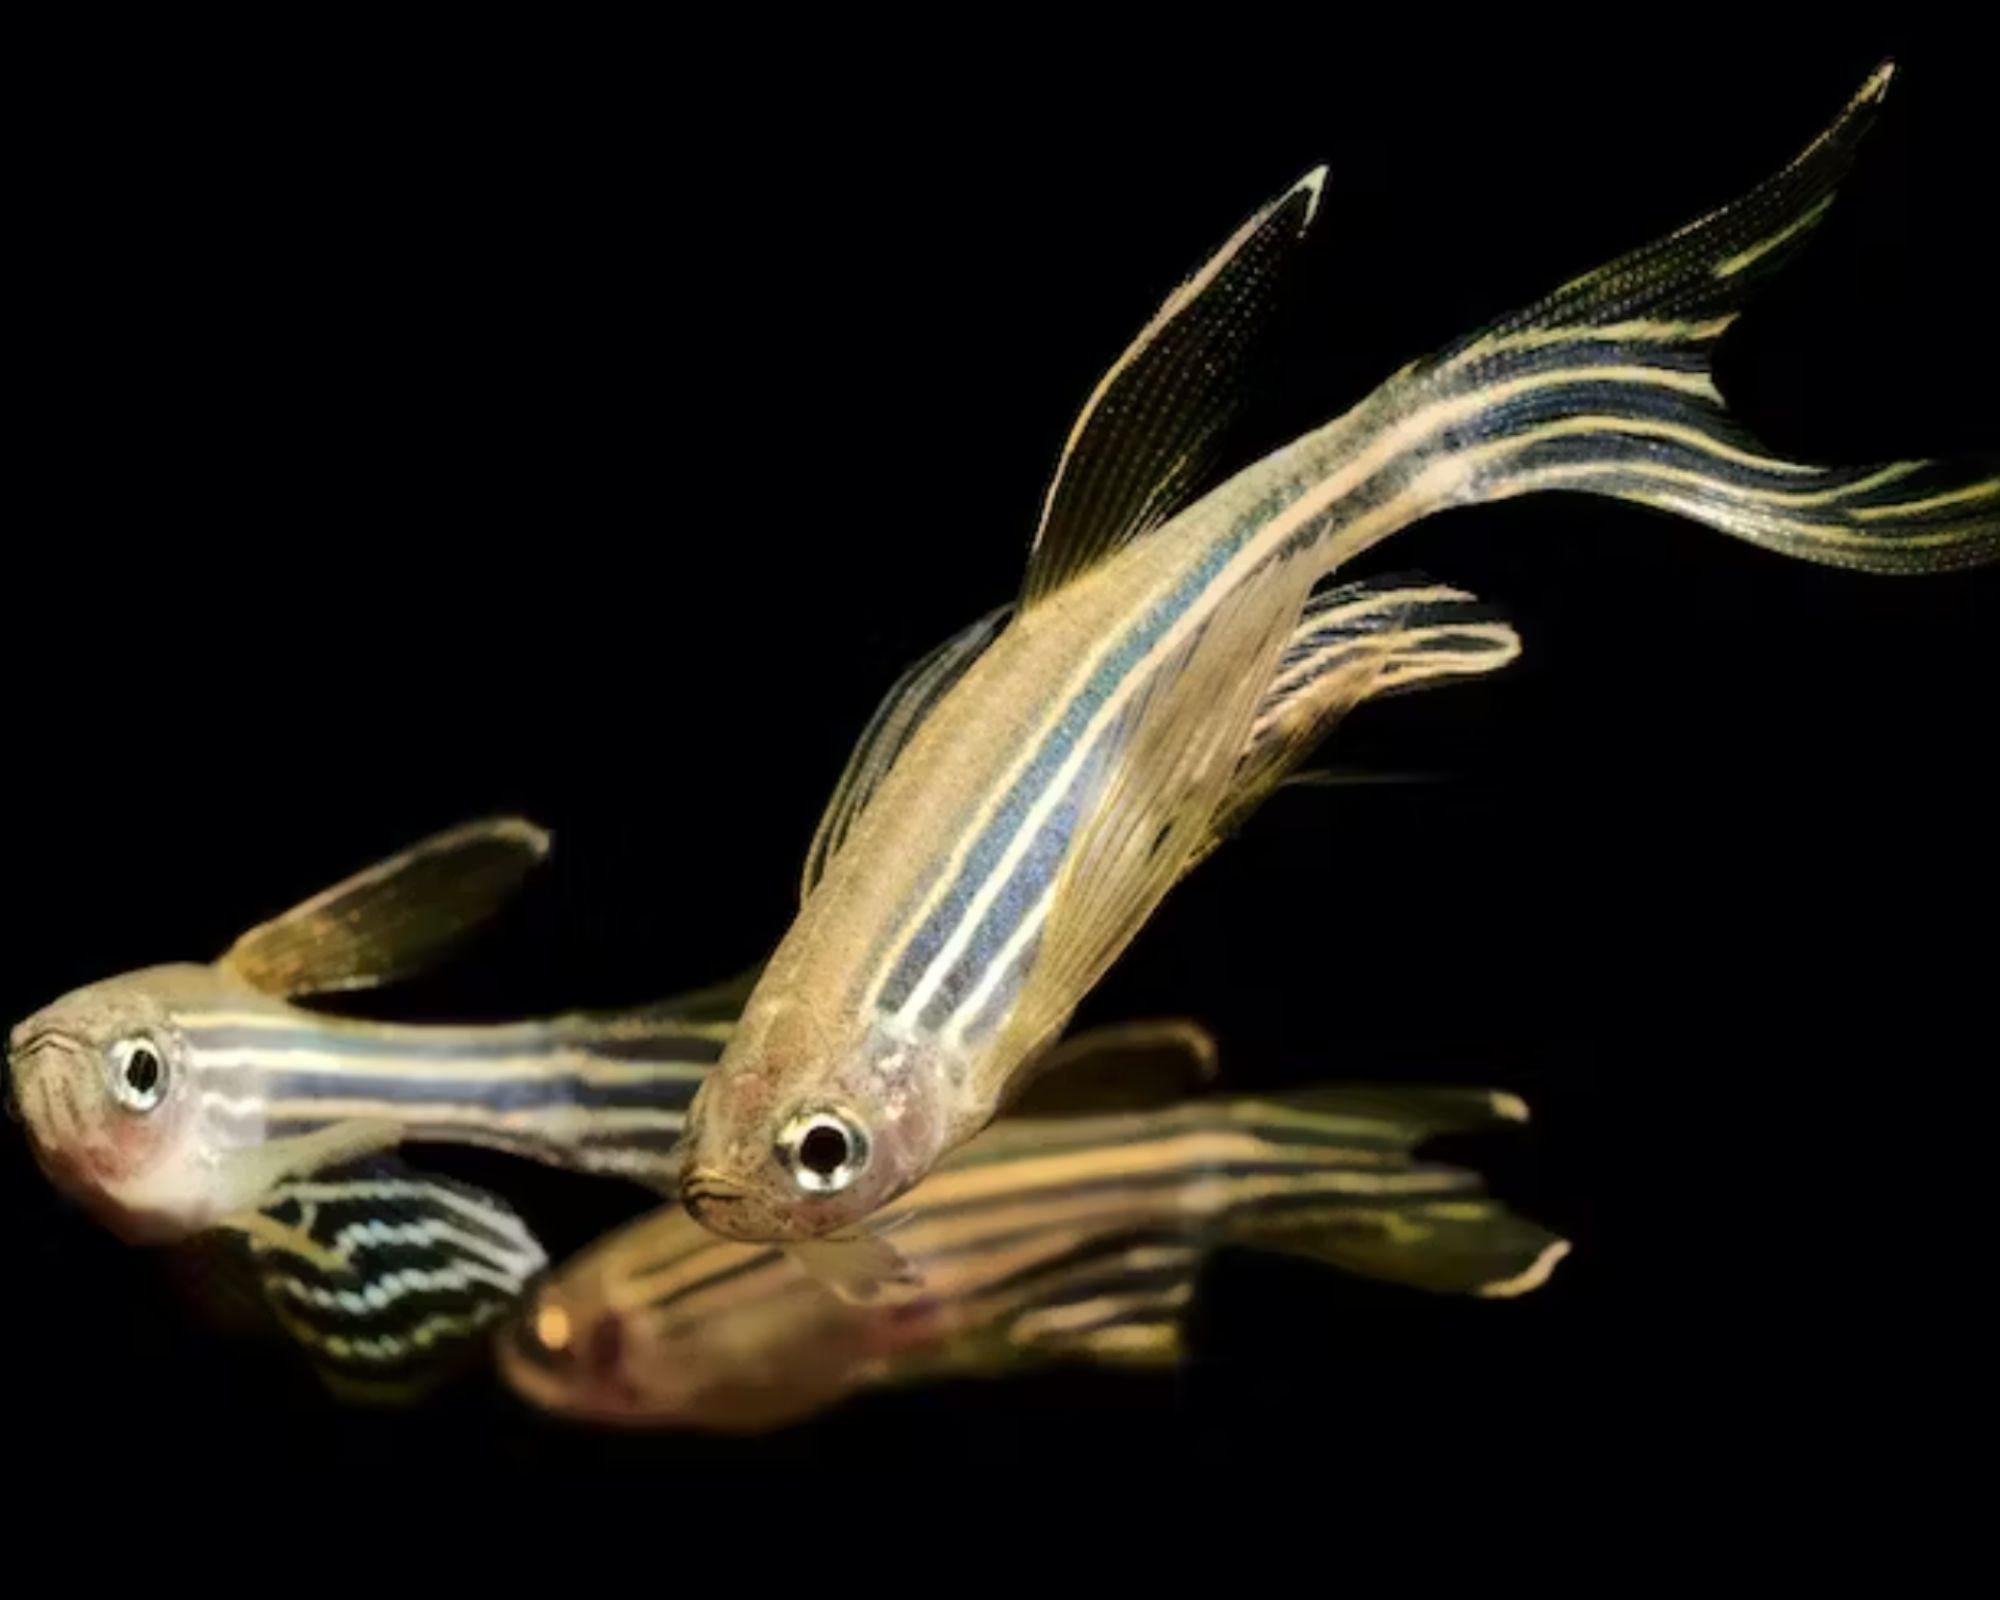 The melanocytes in zebrafish stripes share many similarities to those in people. Dan Olsen/iStock via Getty Images Plus